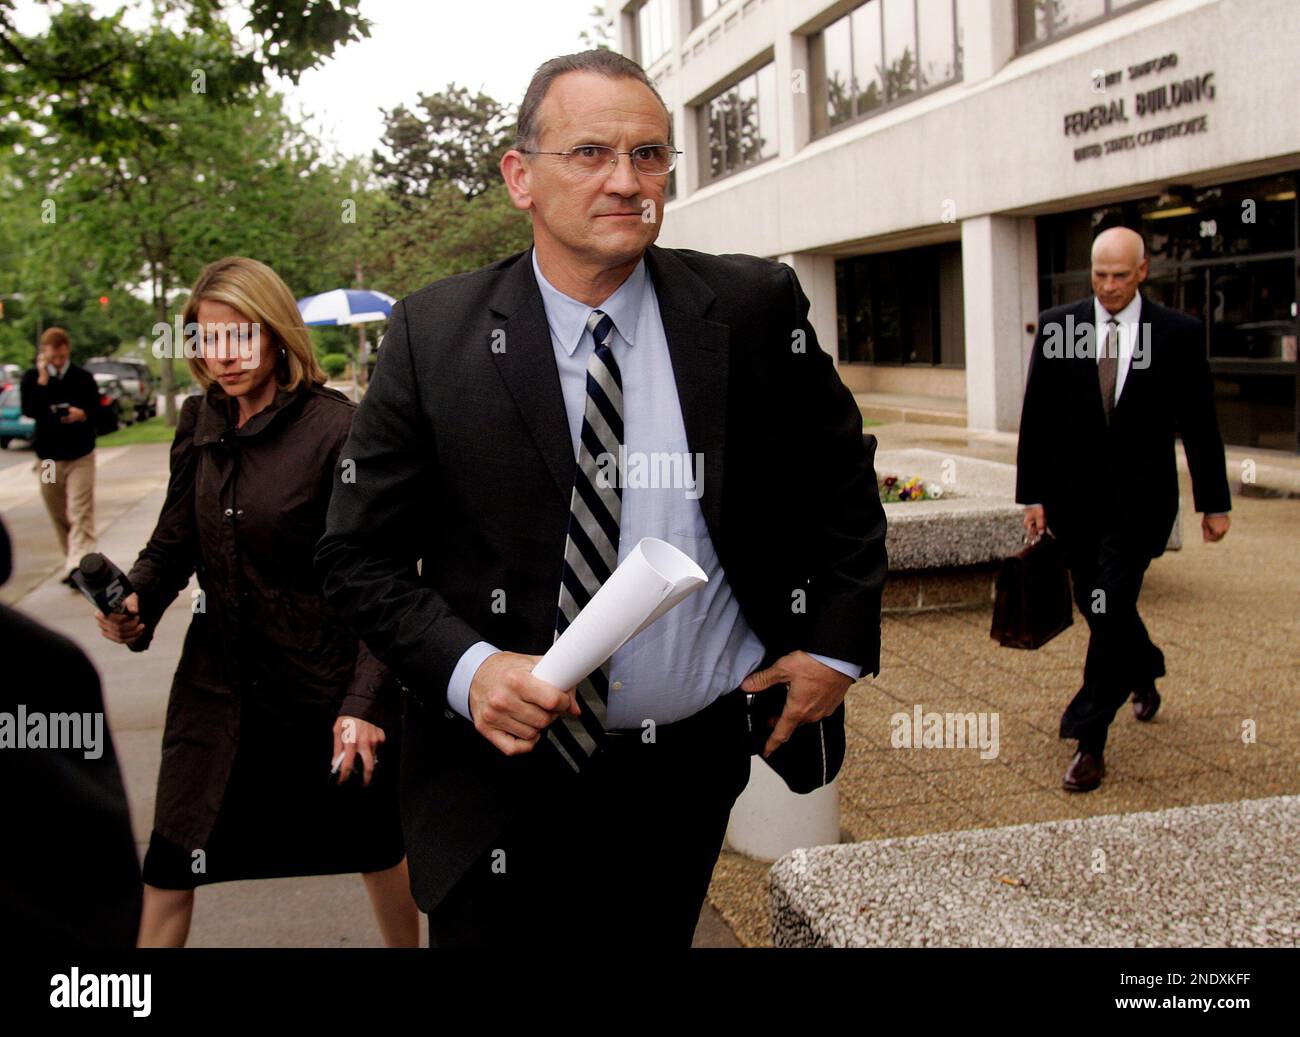 Gary Jackson former president of Blackwater, the company now known as Xe Services, leaves the Terry Sanford Federal Building and Courthouse in Raleigh, N.C., Wednesday, April 21, 2010. (AP Photo/Jim R. Bounds) Stock Photo